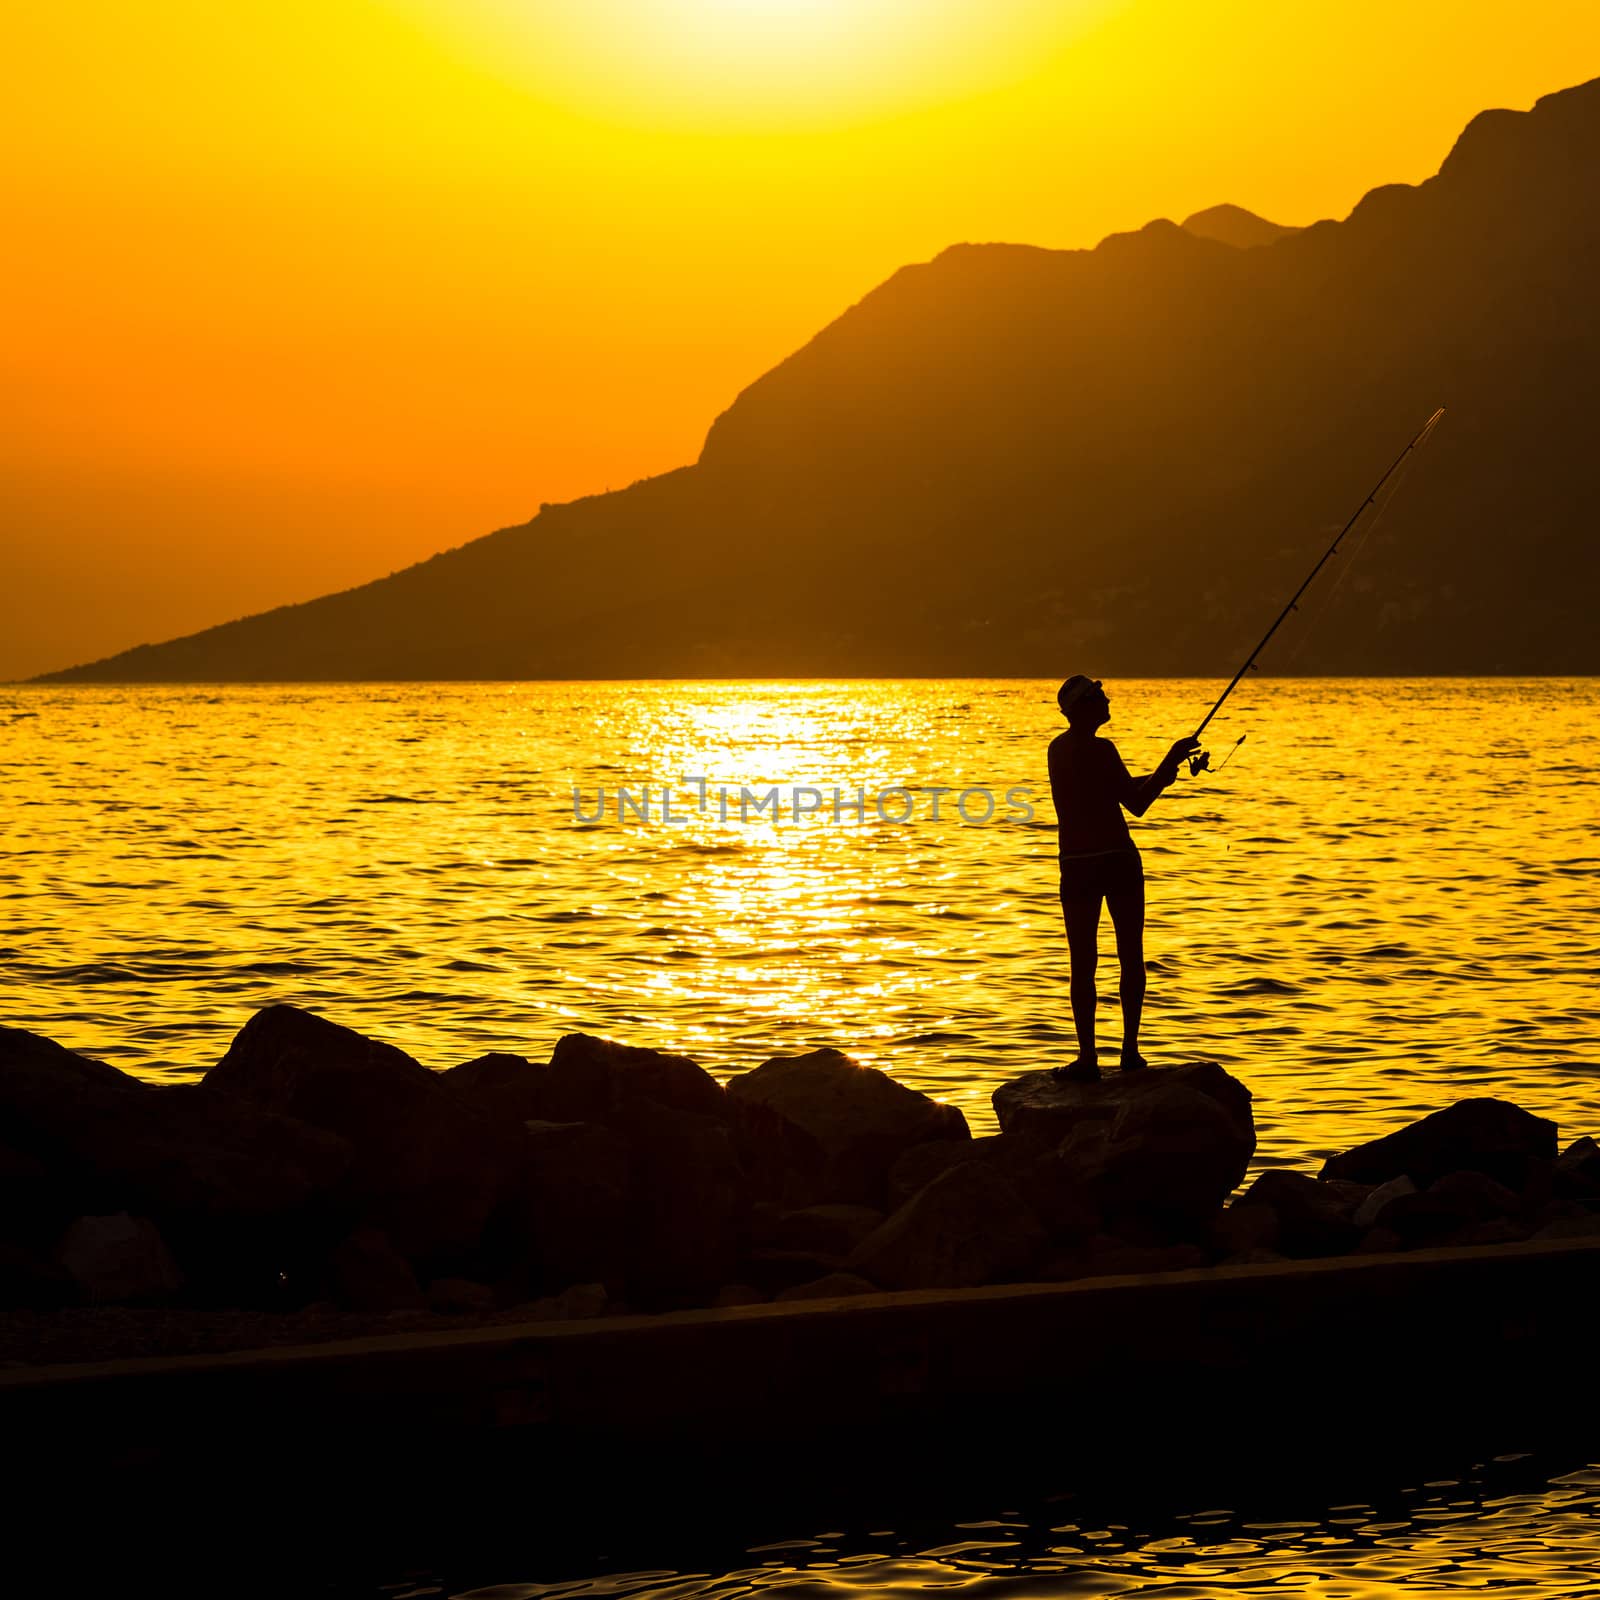 Fisherman's silhouette on the beach at colorful sunset by viktor_cap